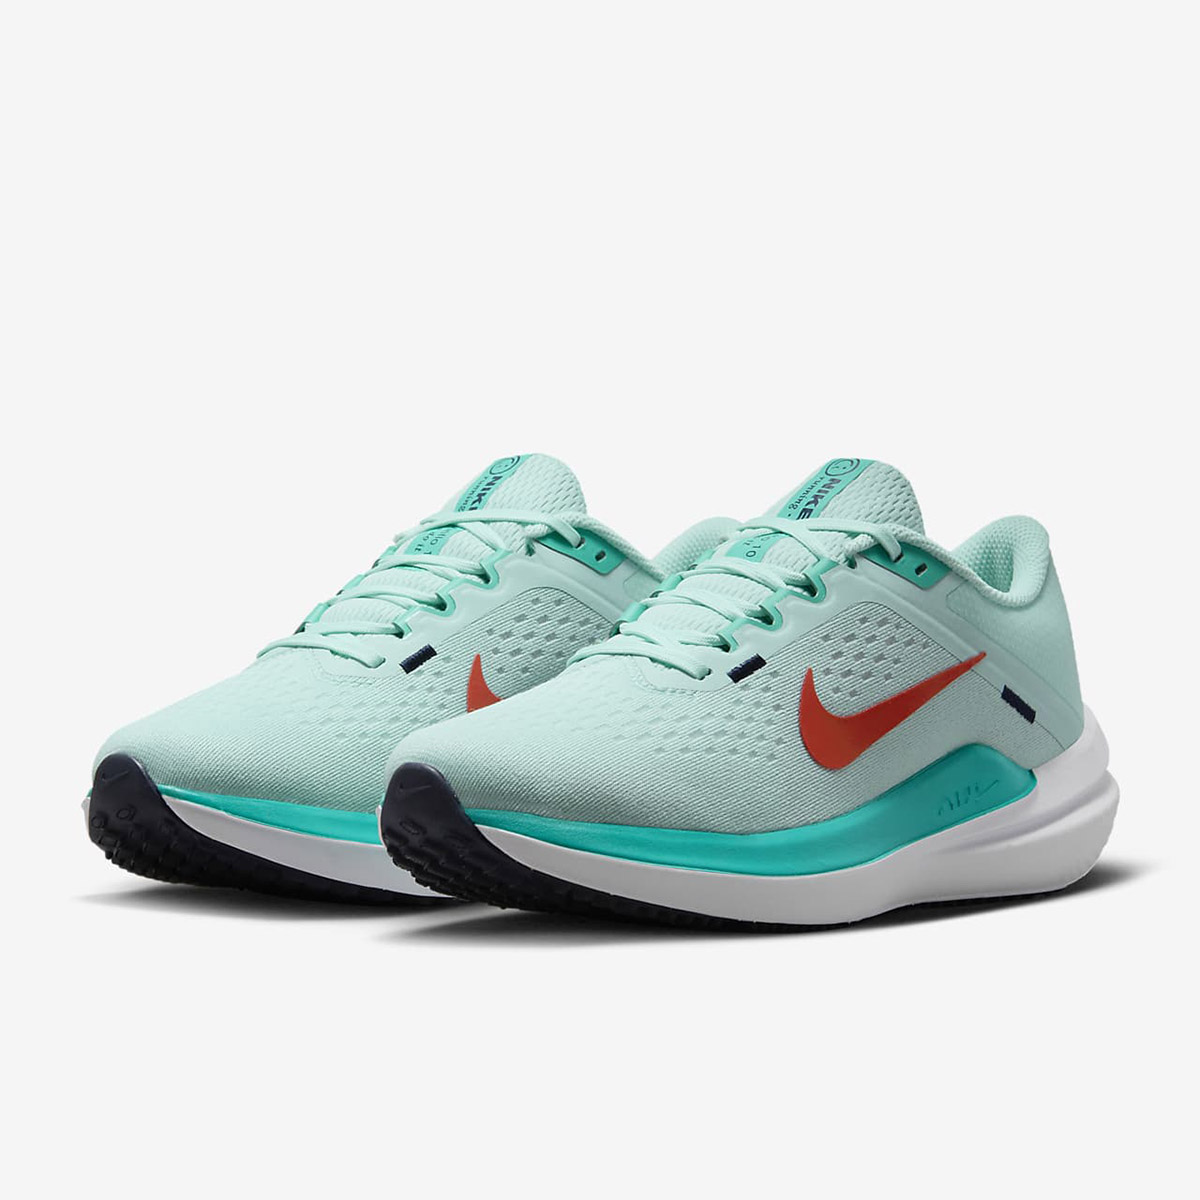 Giày chạy bộ Nữ NIKE W AIR WINFLO 10 - JADE ICE/CLEAR JADE/WHITE/PICANTE RED - 6 US